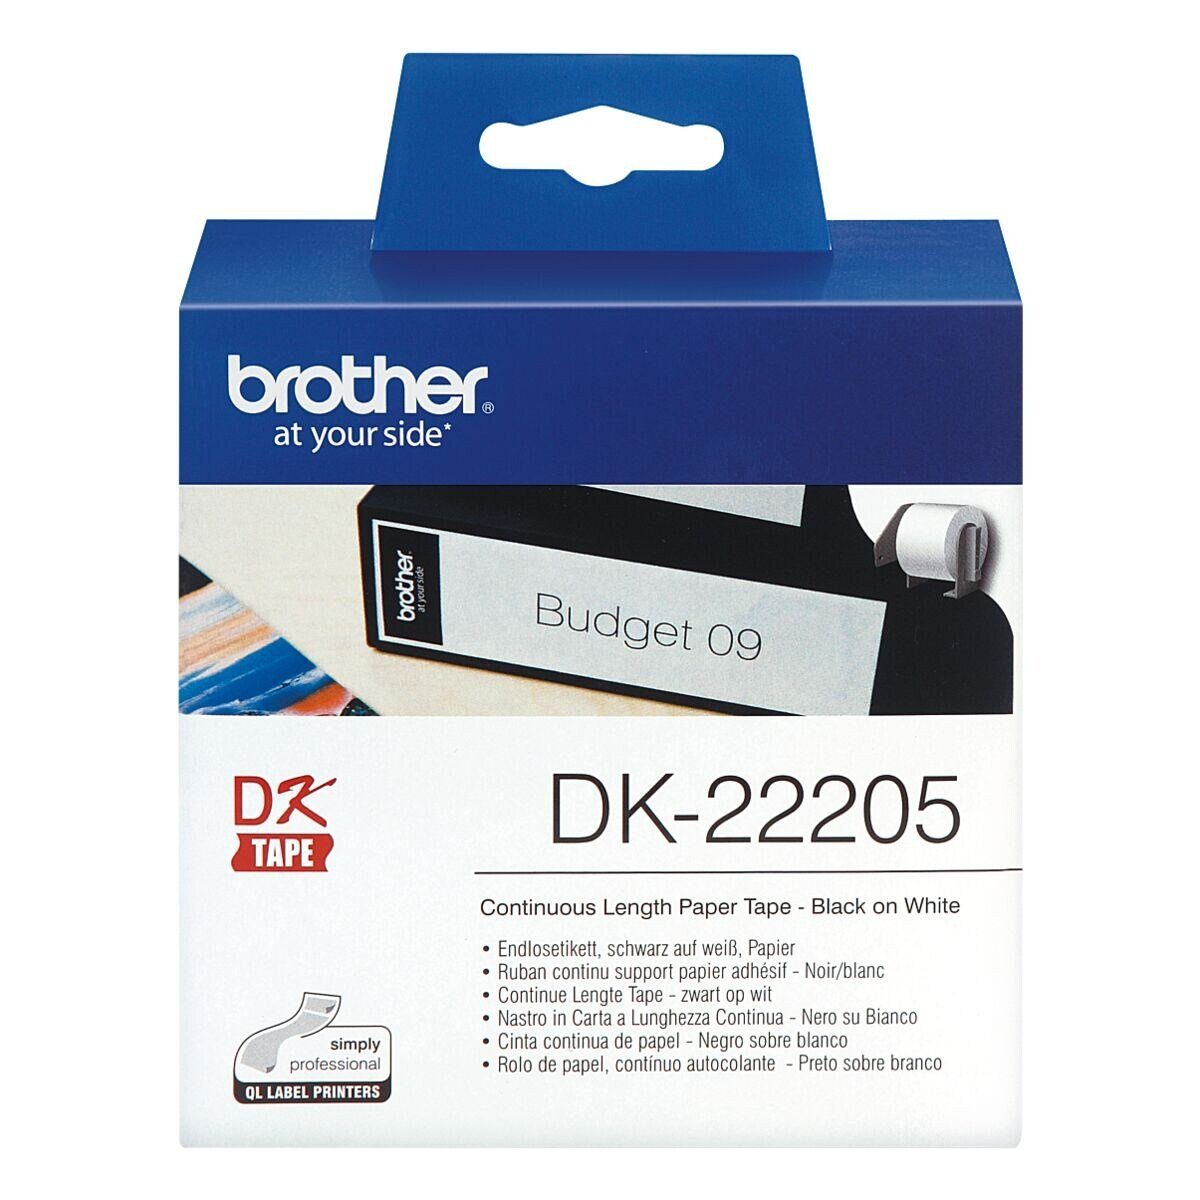 mm/30,48 62 Brother Endlosrolle B/L m DK-22205, Thermorolle